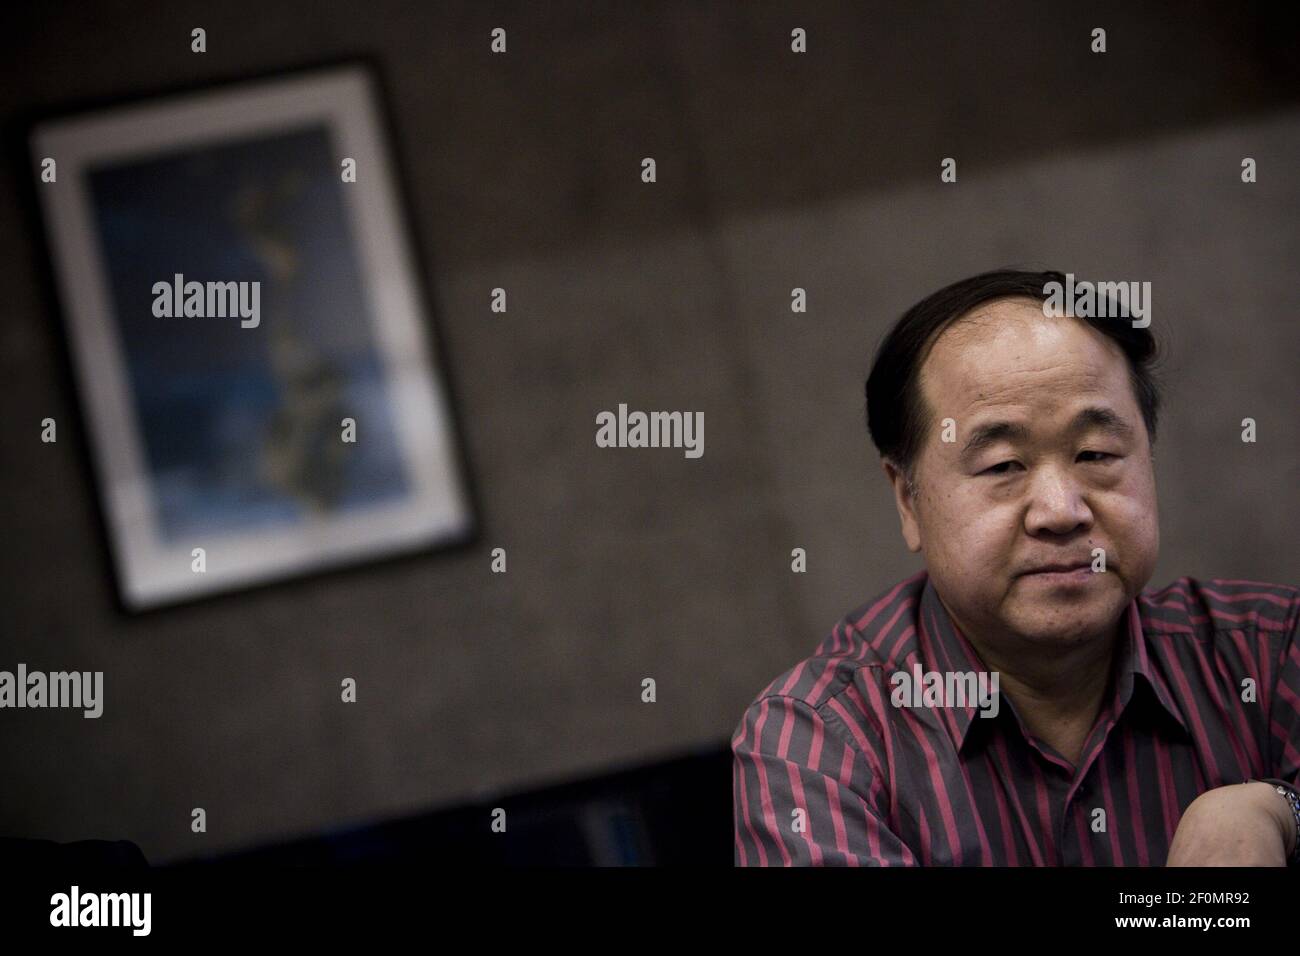 Chinese writer Mo Yan, laureate of the 2012 Nobel Literature Prize, is interviewed in Beijing, China, 18 June 2009. Chinese Nobel laureate Mo Yan was awarded an honorary doctorate from Peru's Pontifical Catholic University (PUCP) on Tuesday (30 July 2019). The 2012 Nobel Prize laureate for literature received the honor for his literary contributions and the impact of his works in both China and Latin America, the university said. (Photo by wang xiao dong - Imaginechina/Sipa USA) Stock Photo